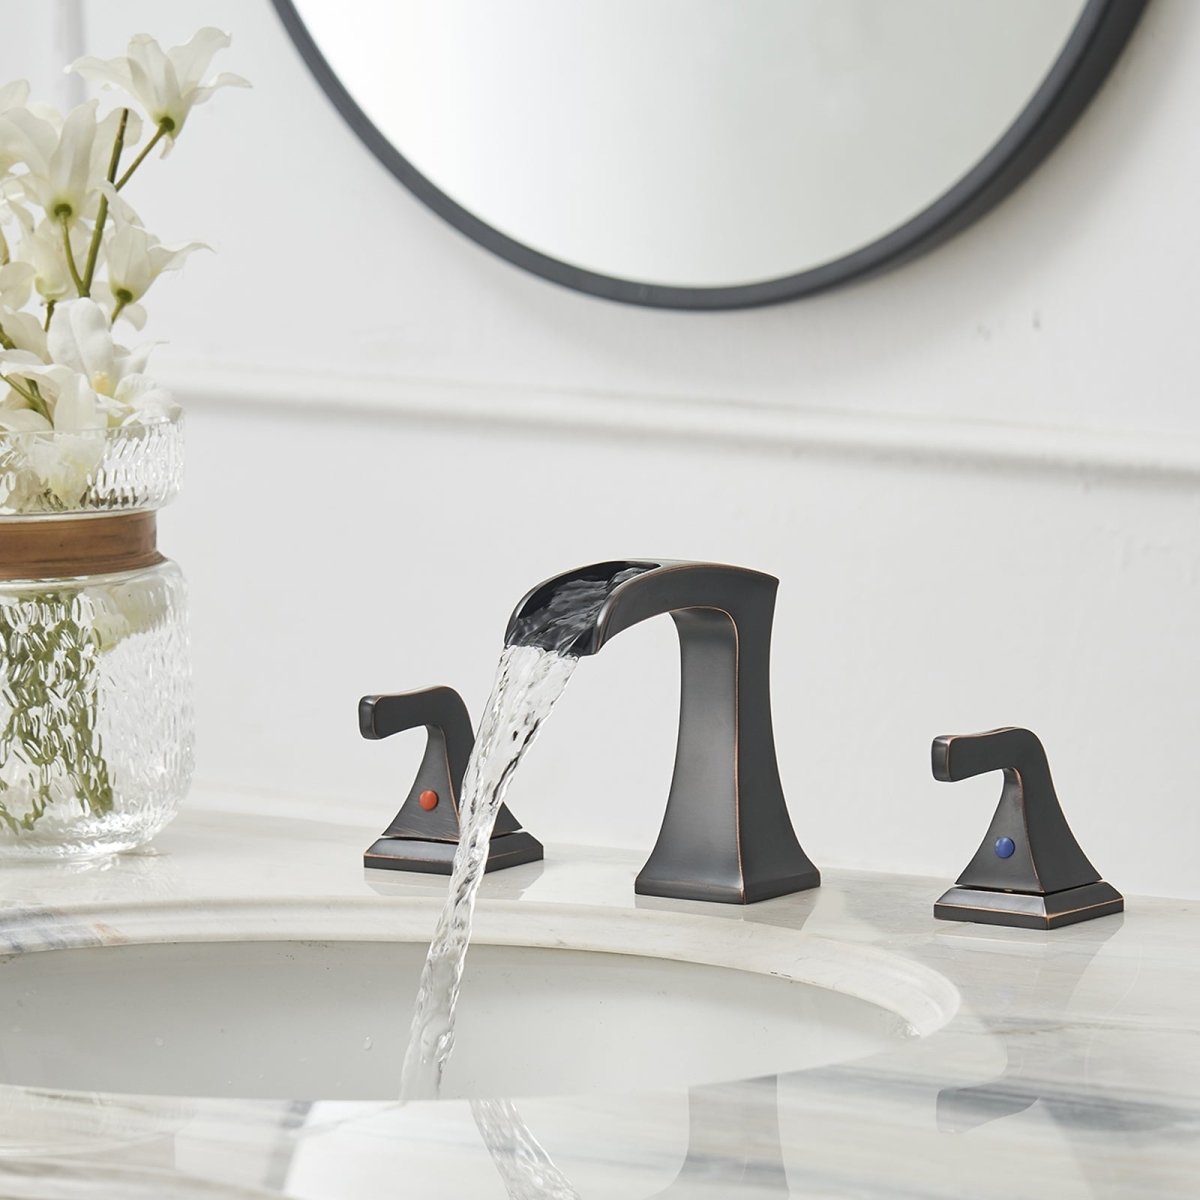 8 in 2-Handle Waterfall Bathroom Faucet Oil Rubbed Bronze - buyfaucet.com